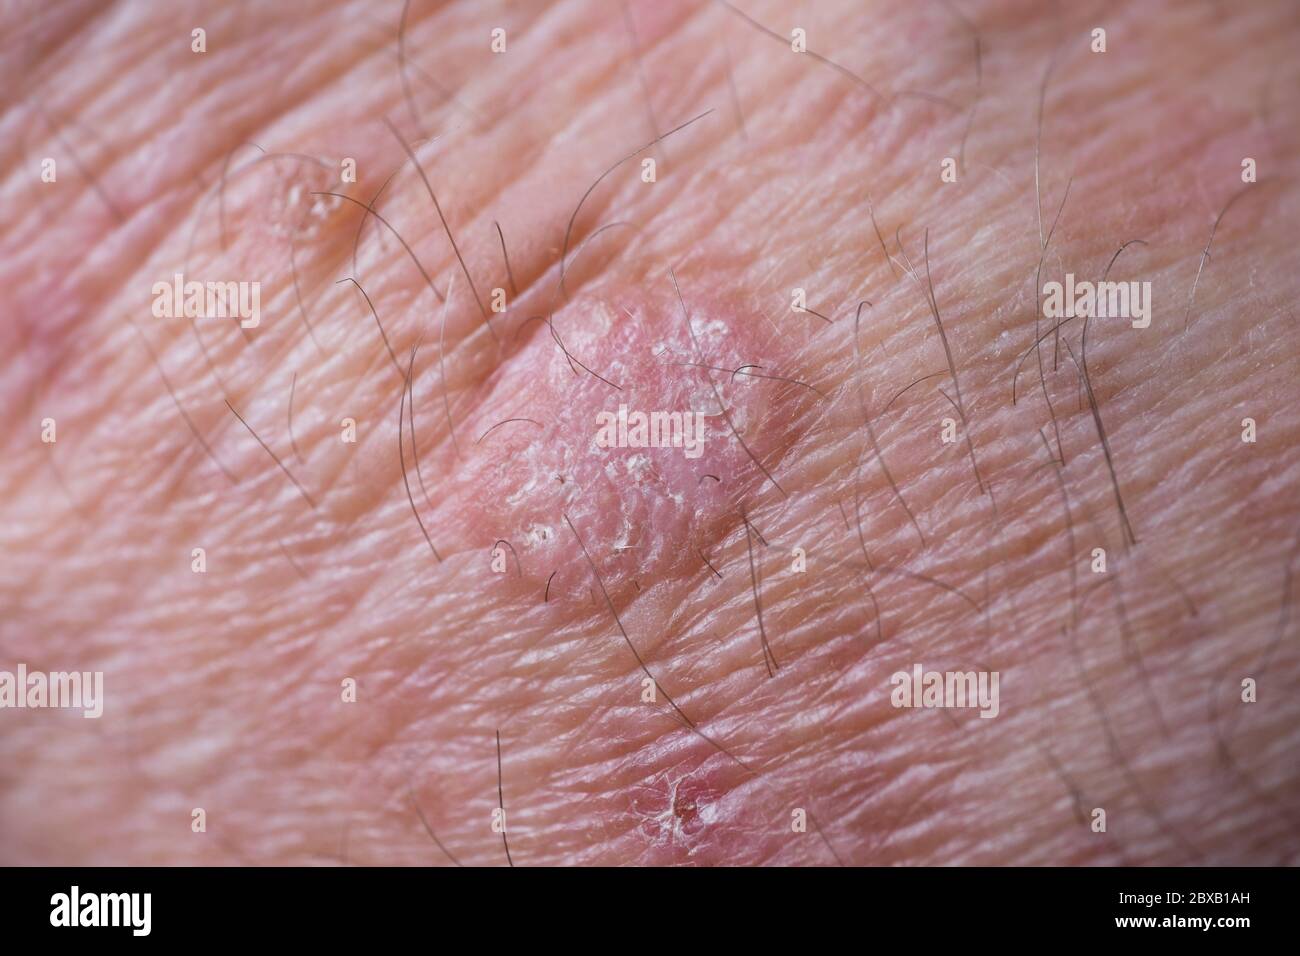 Crude eczema with redness, swellings, bumps and flakes on the wrist of a man. This can be treated with cryosurgery or certain ointments Stock Photo